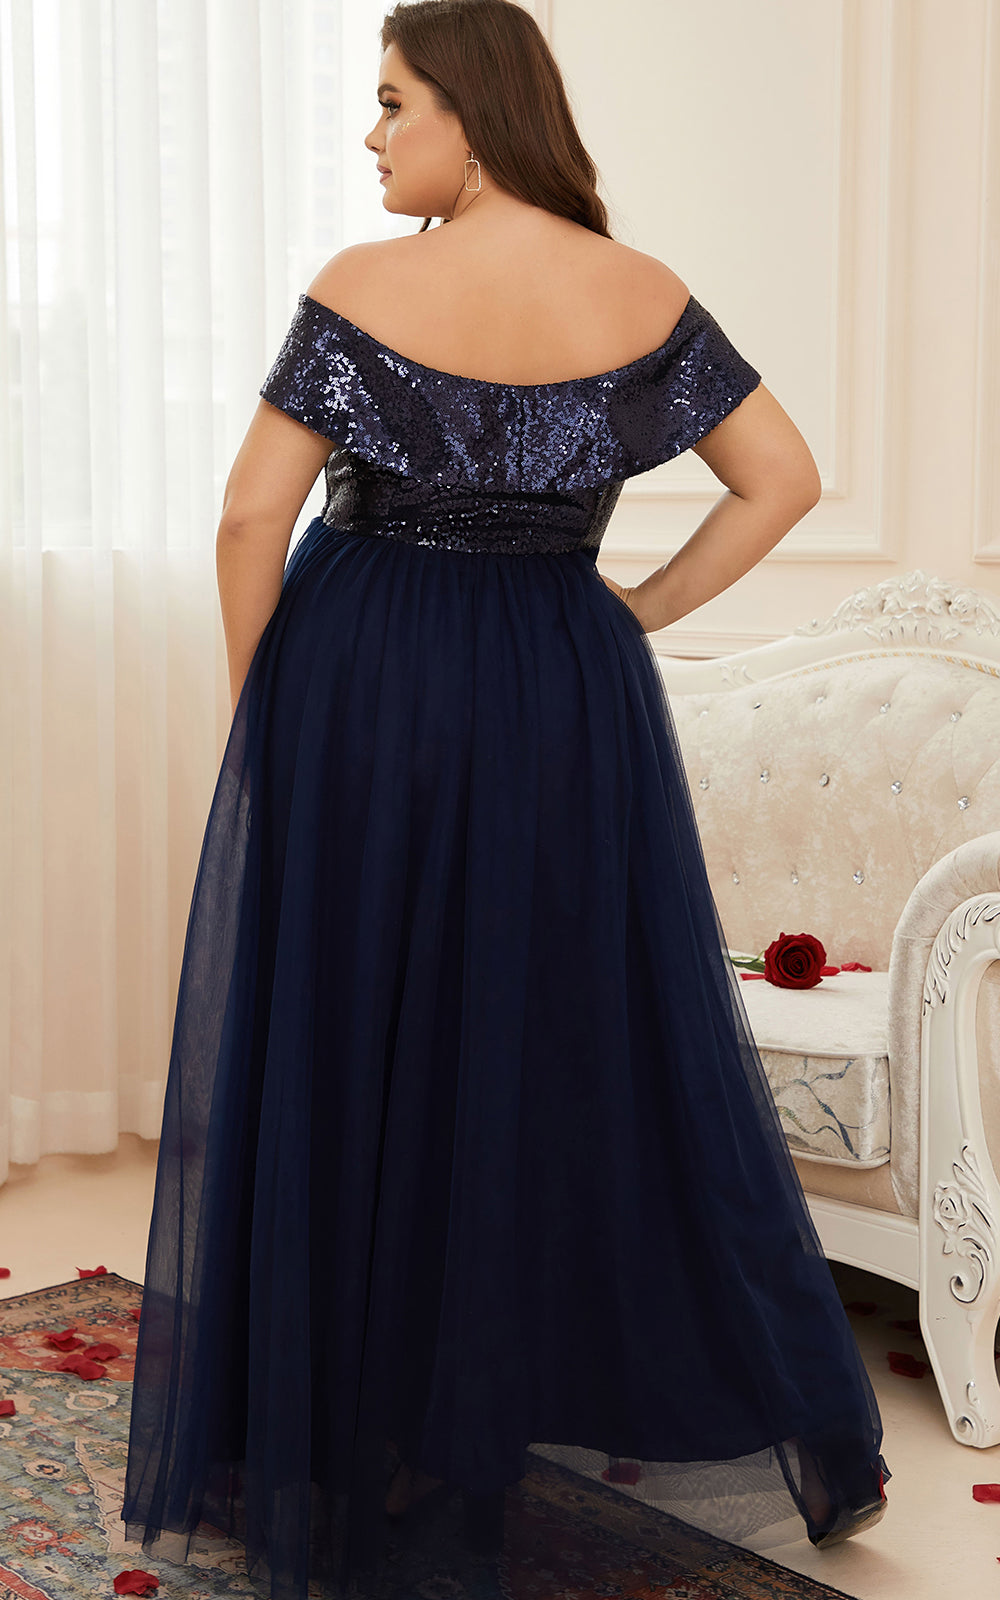 Plus Size Elegant Women Evening Dresses Long Formal Gowns Sequins Tulle Glitter Sexy Partywear Maxi Floor Length for Wedding Guest, Navy Blue, 0XL